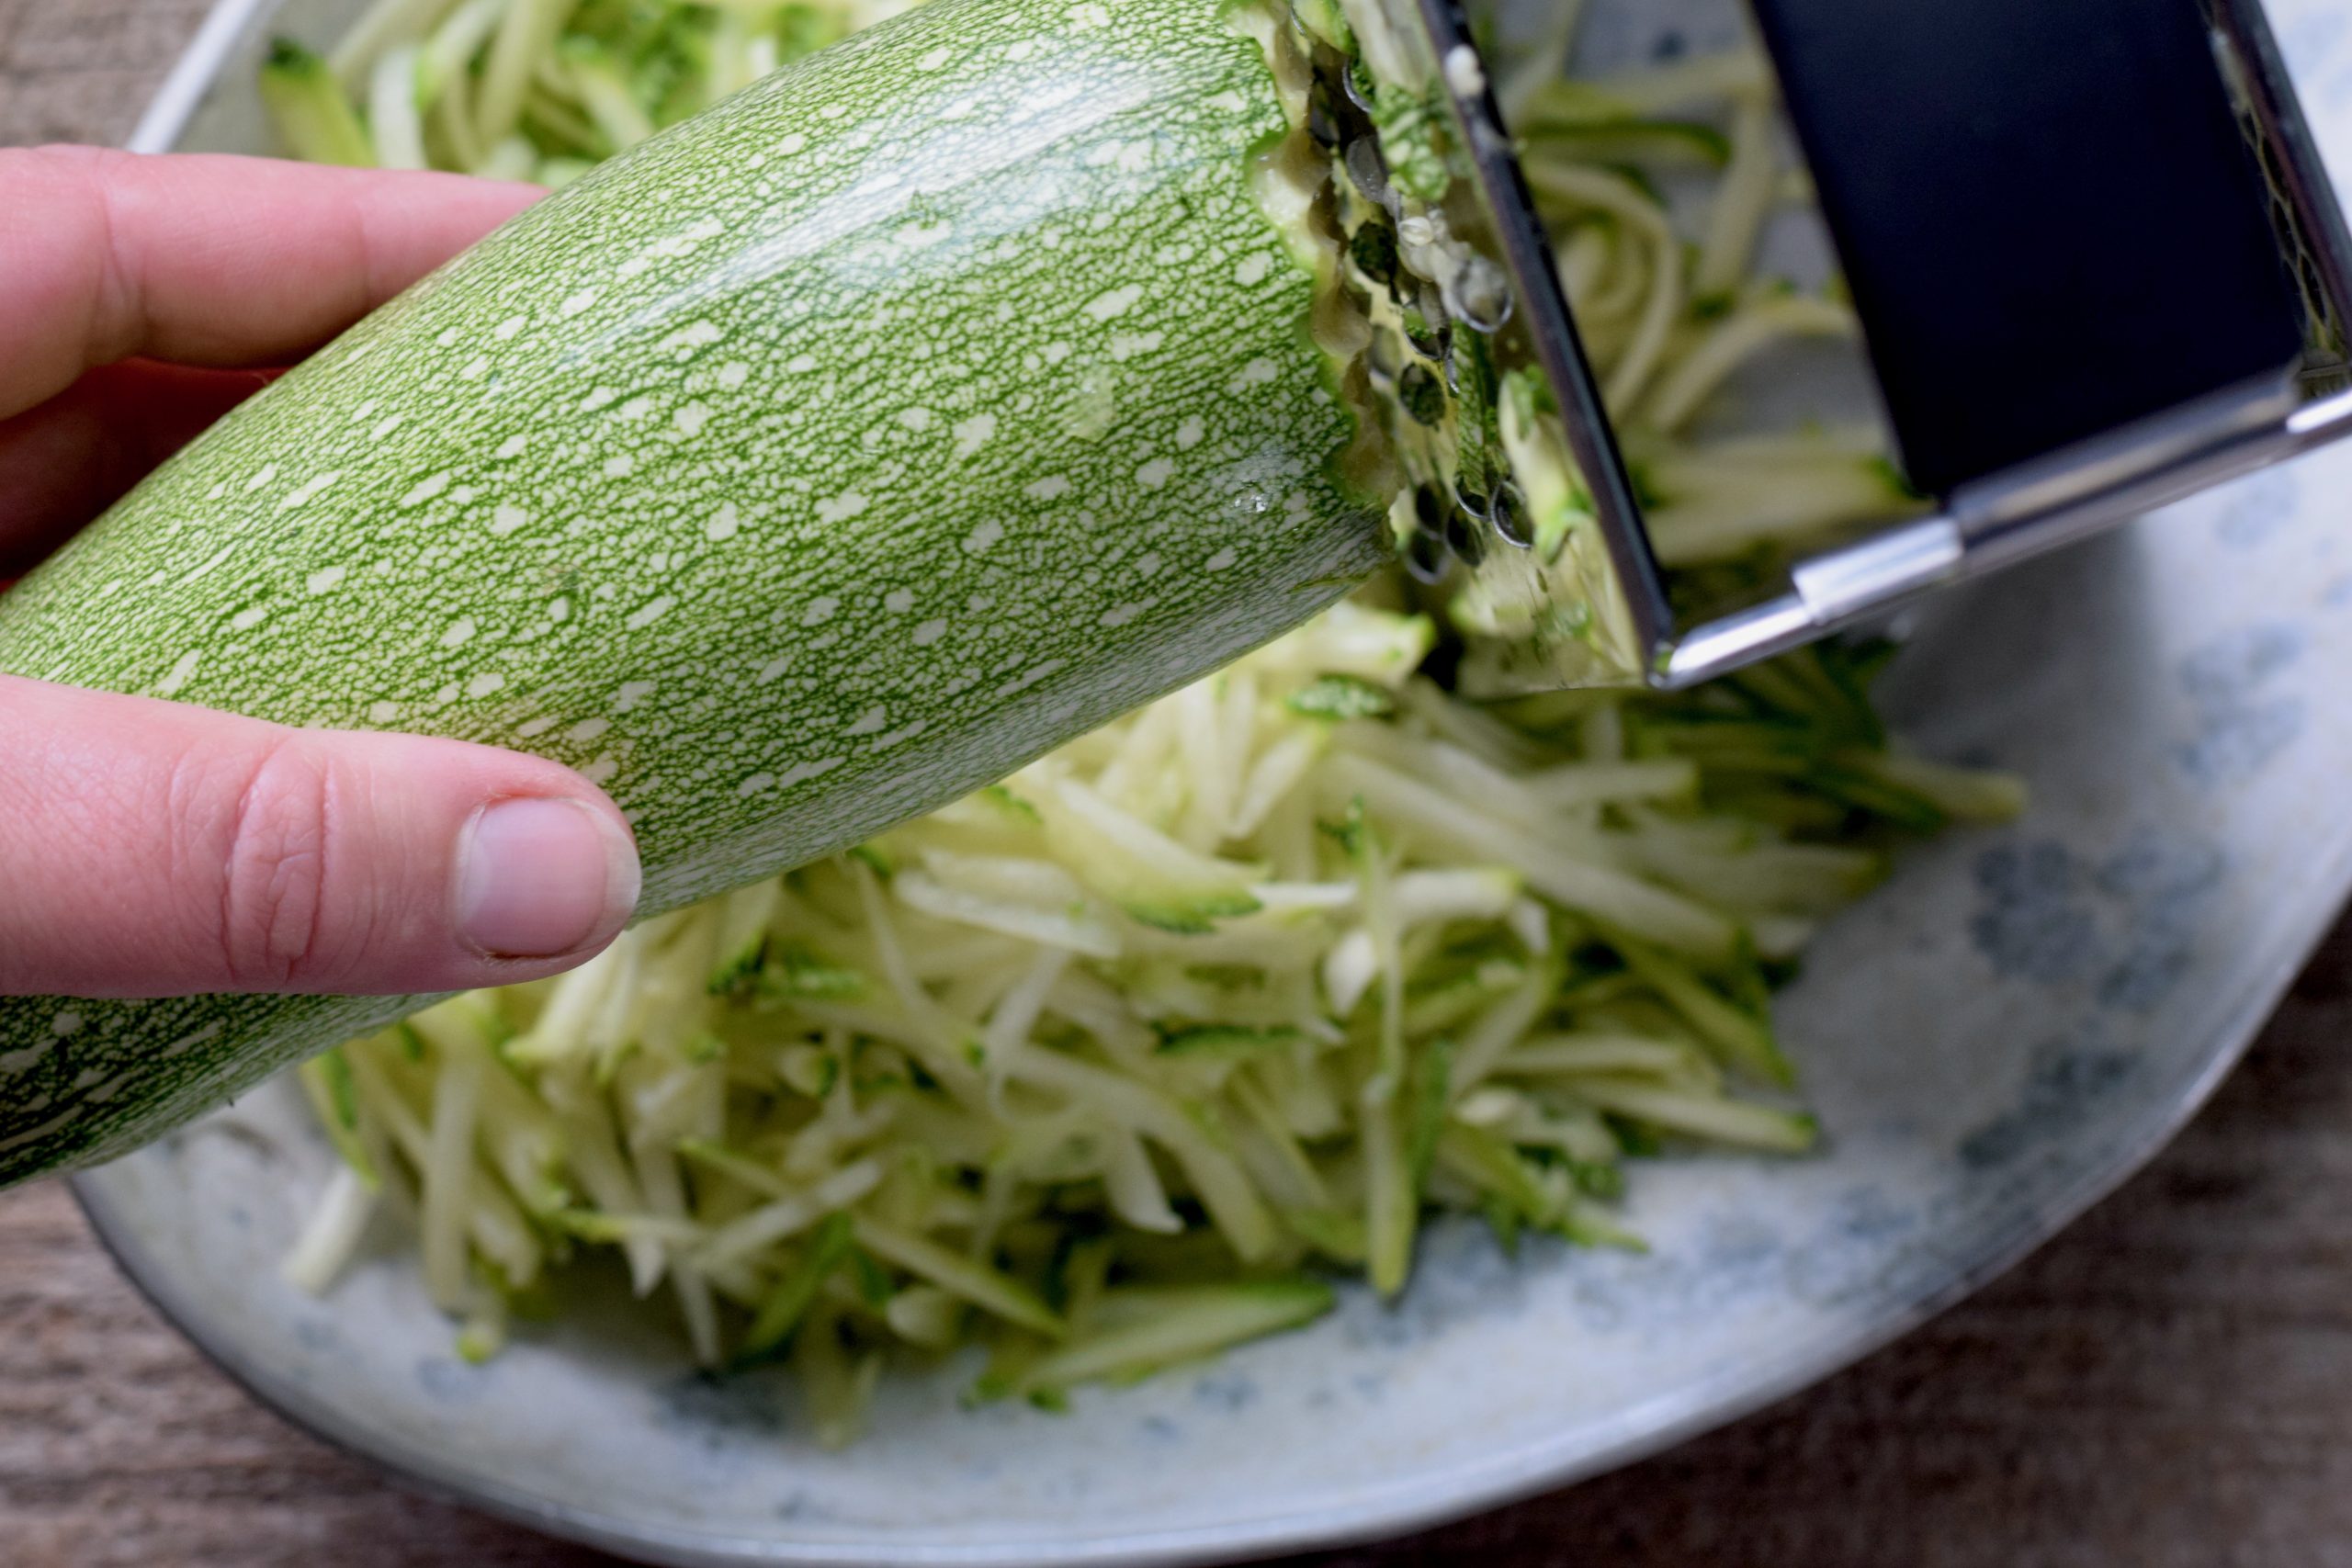 https://wholefedhomestead.com/wp-content/uploads/2022/06/zucchini-grated-scaled.jpeg